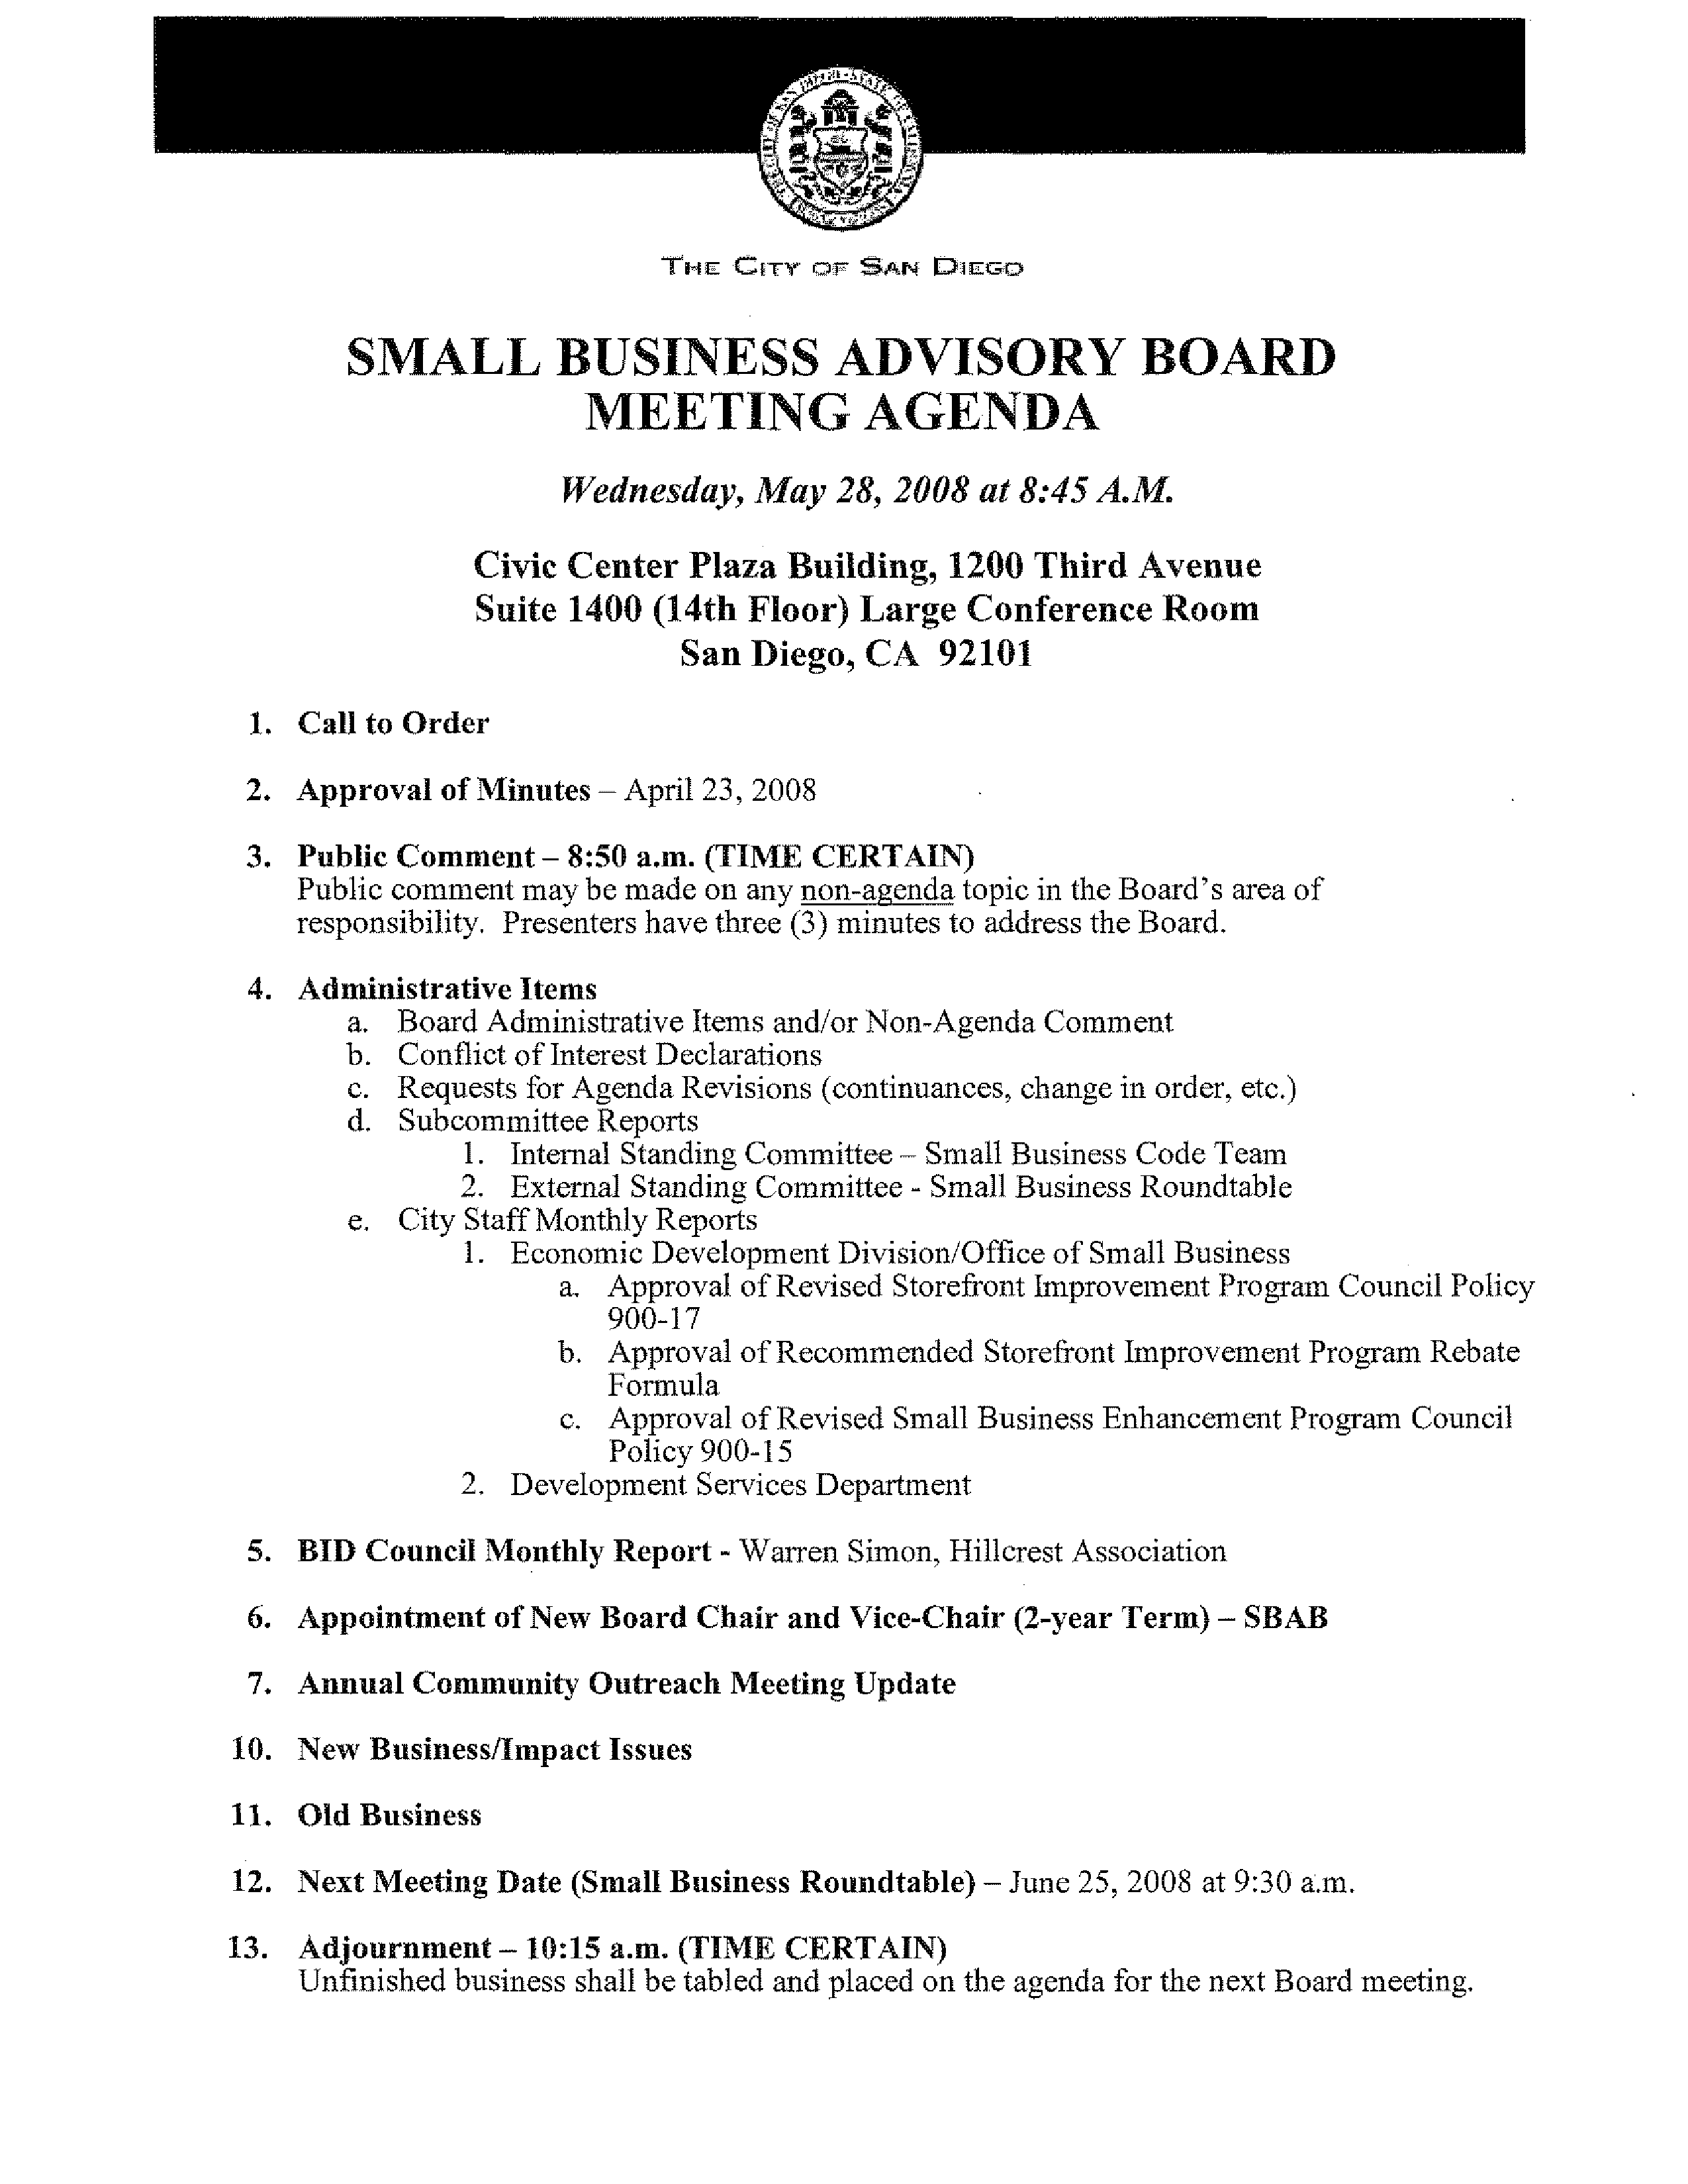 small business board meeting agenda template